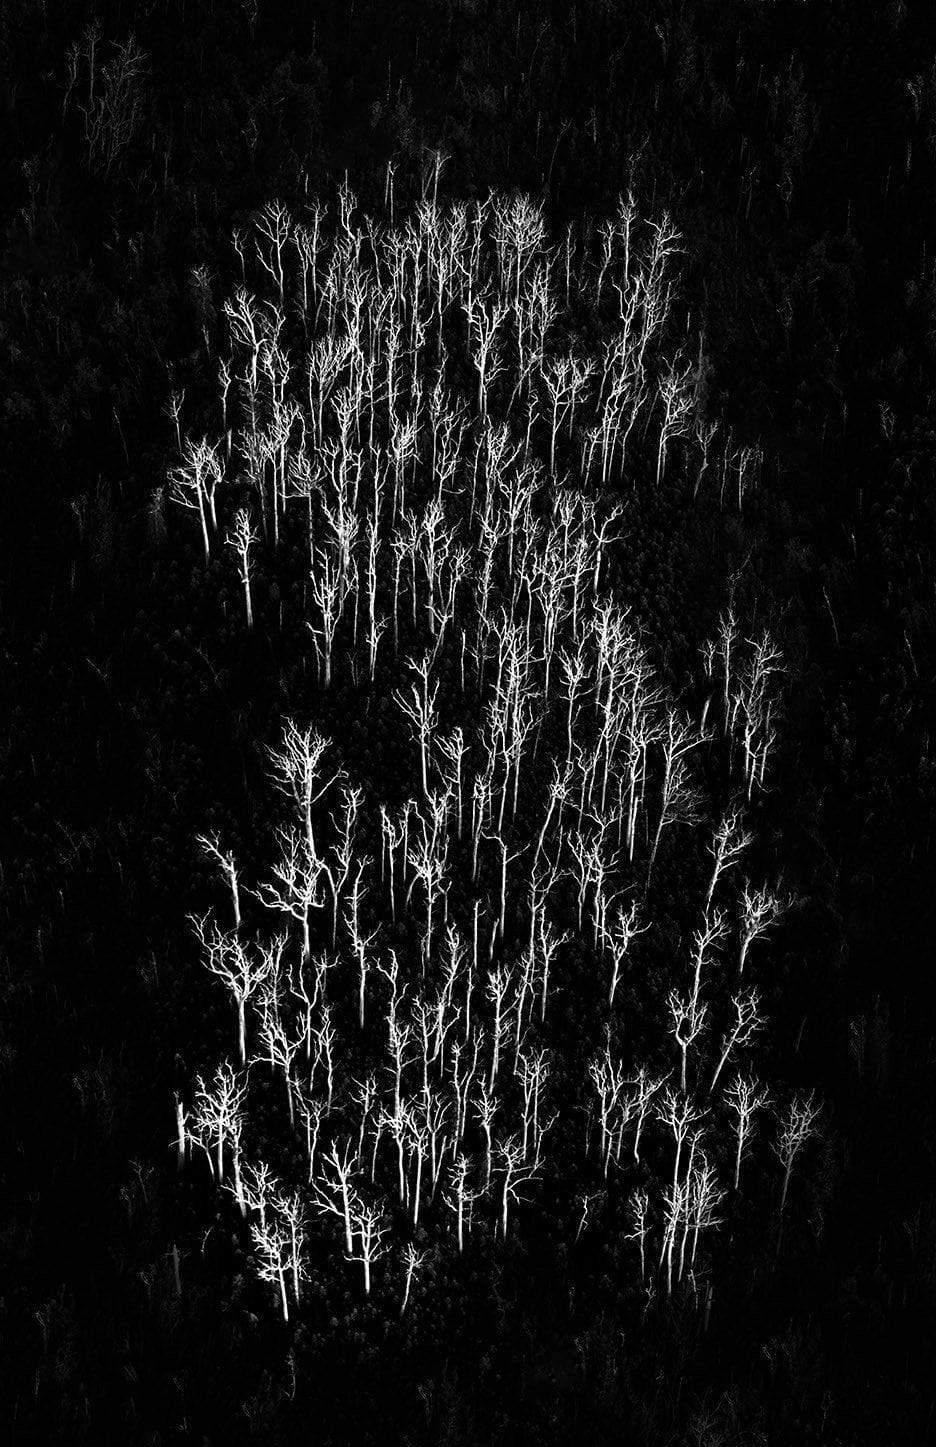 Aerial view of a group of standing plants in the darkness, Sticks